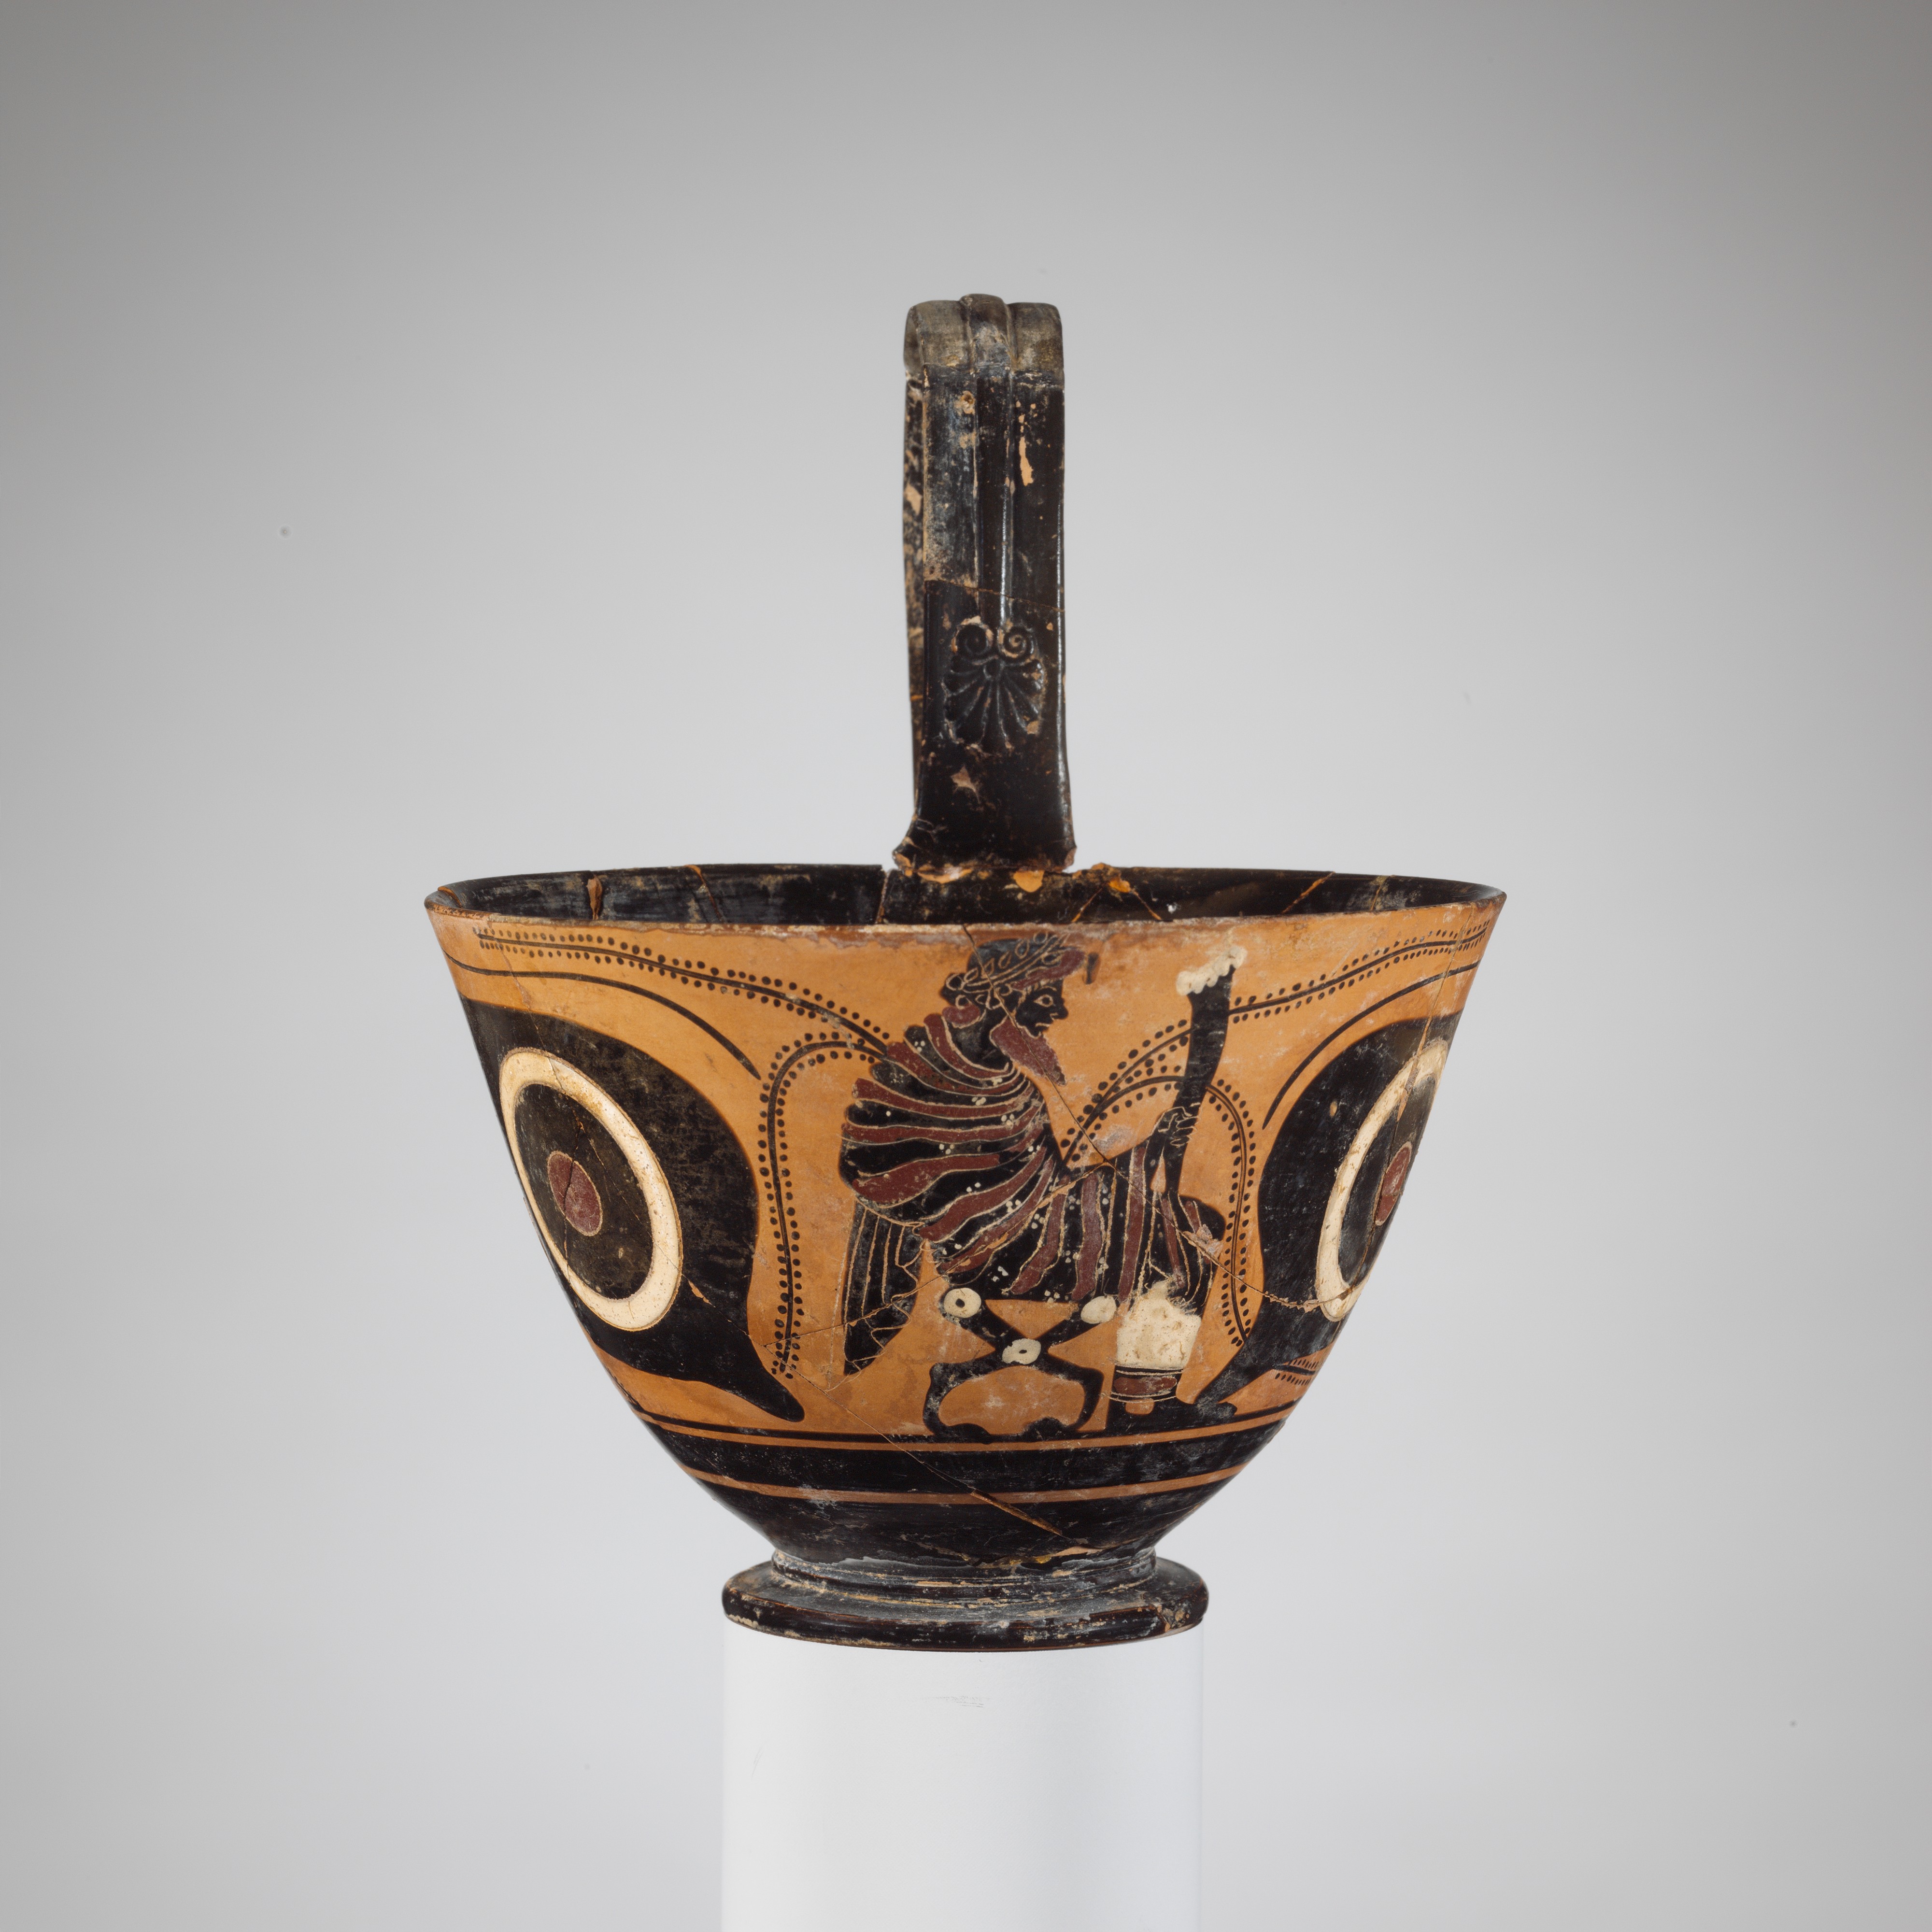 Attributed to the Group of Vatican G.57, Terracotta kyathos (cup-shaped  ladle), Greek, Attic, Archaic